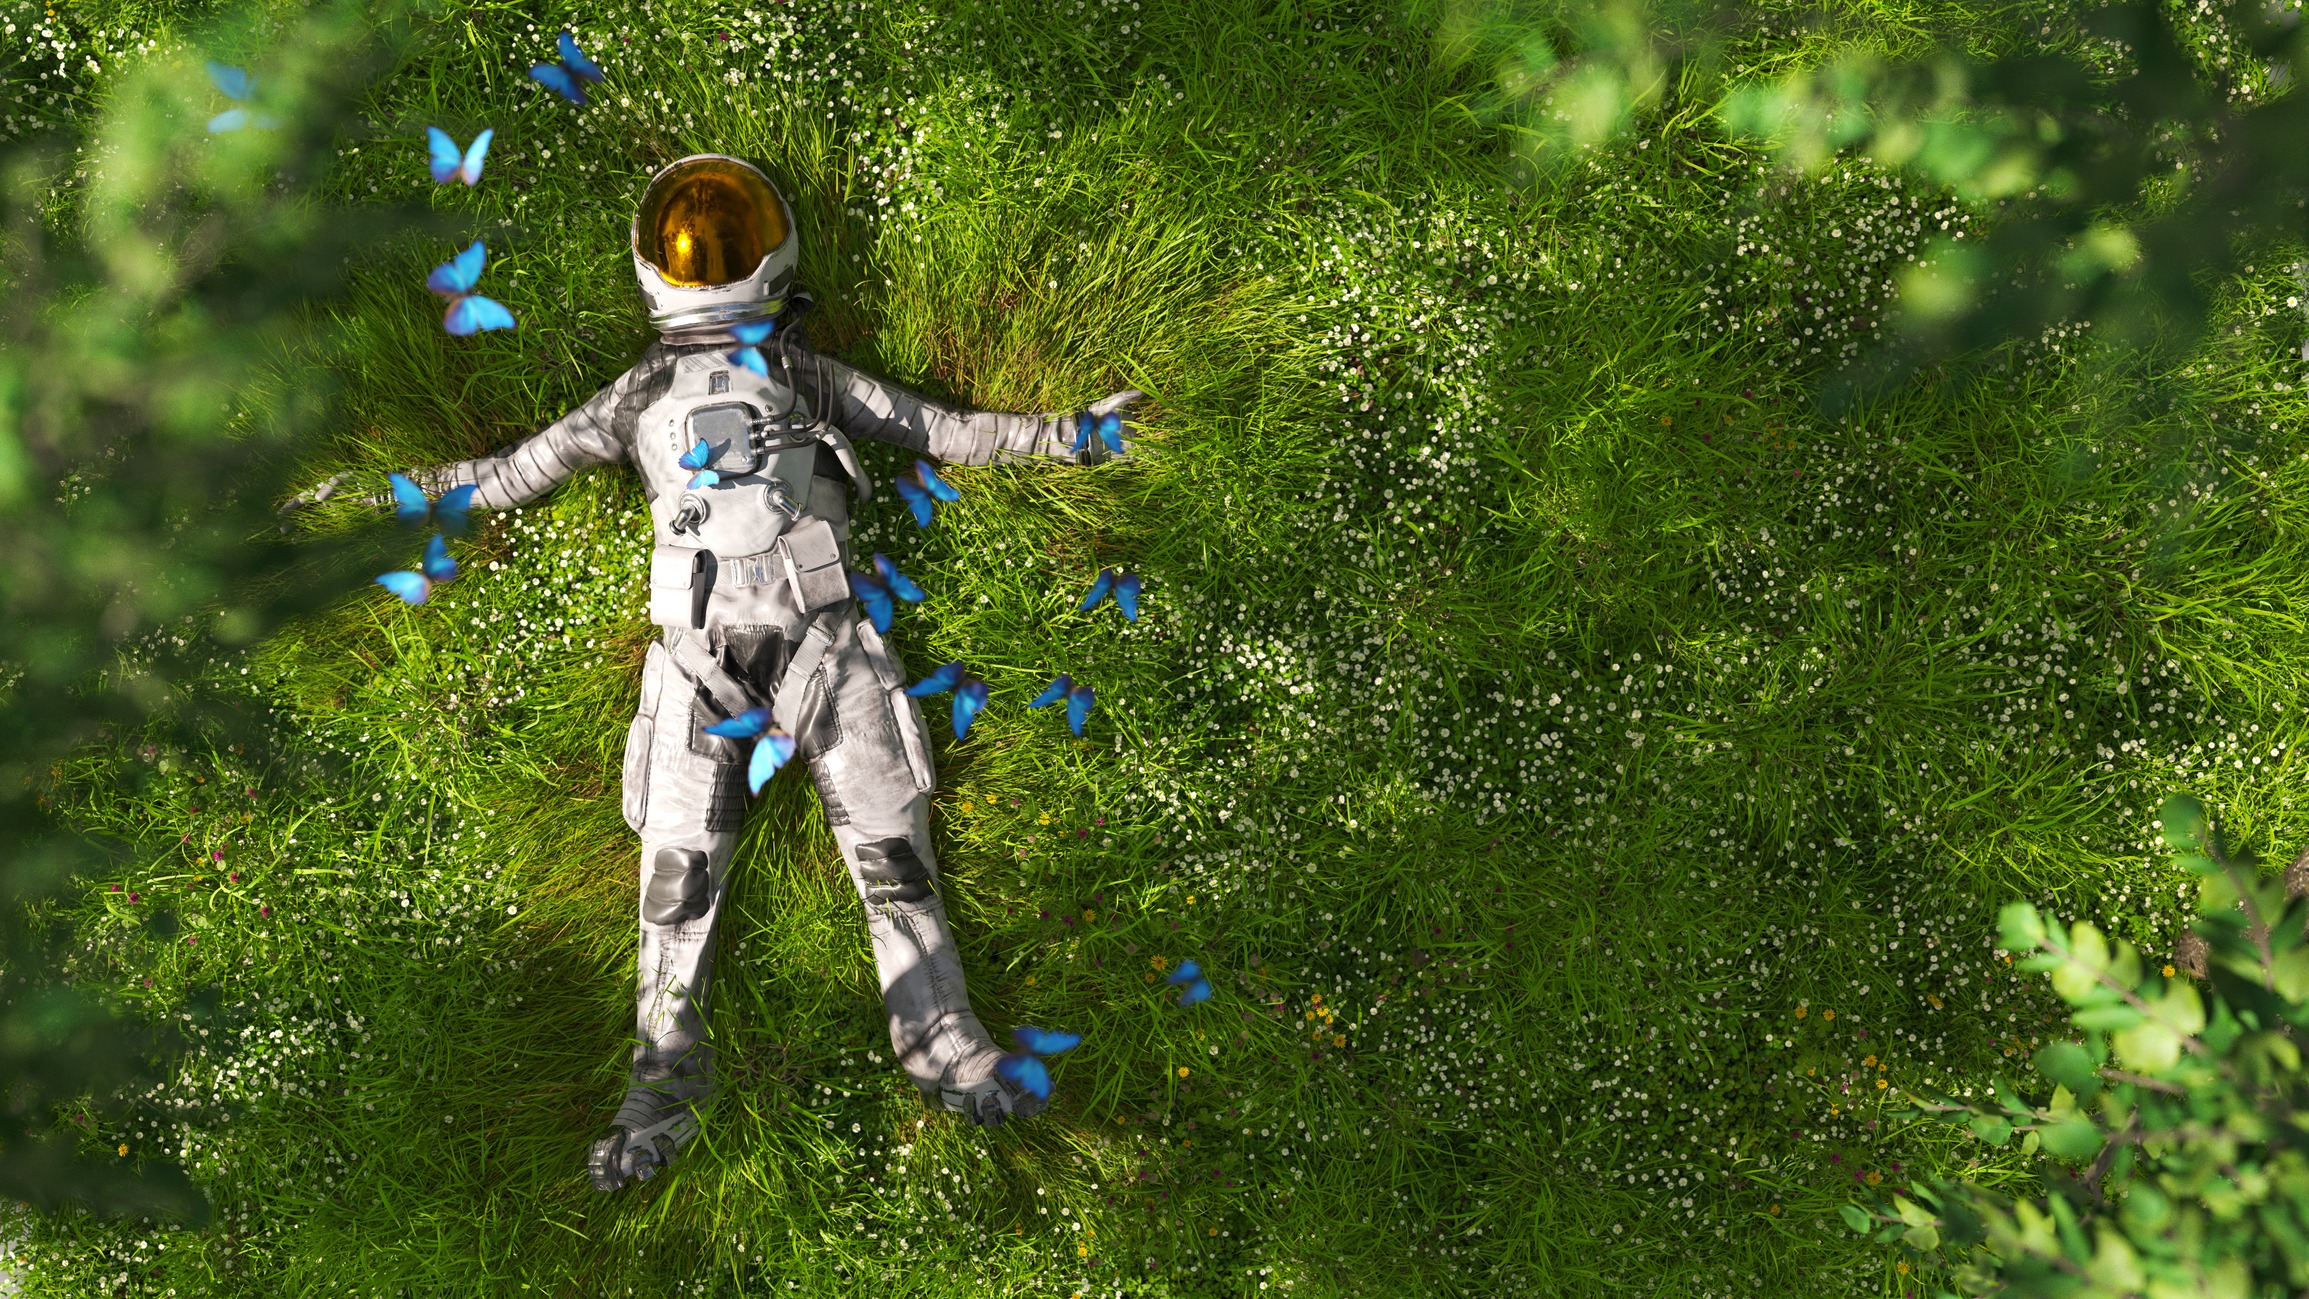 A 3D render of an astronaut laying in a field of grass surrounded by blue butterflies.